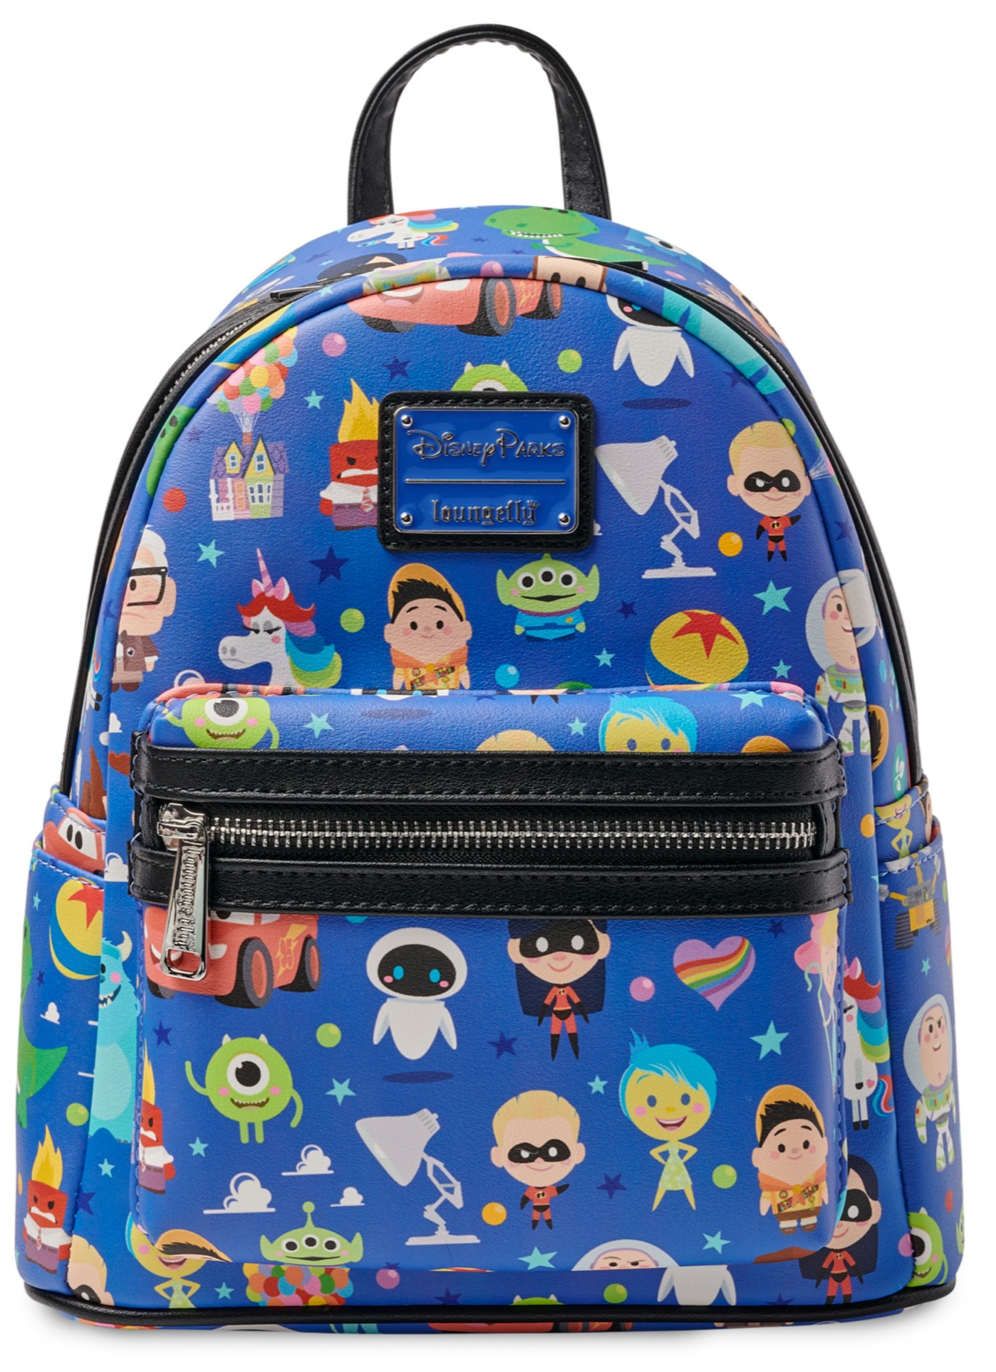 Disney Pixar Chibi Loungefly Mini Backpack New With Tags